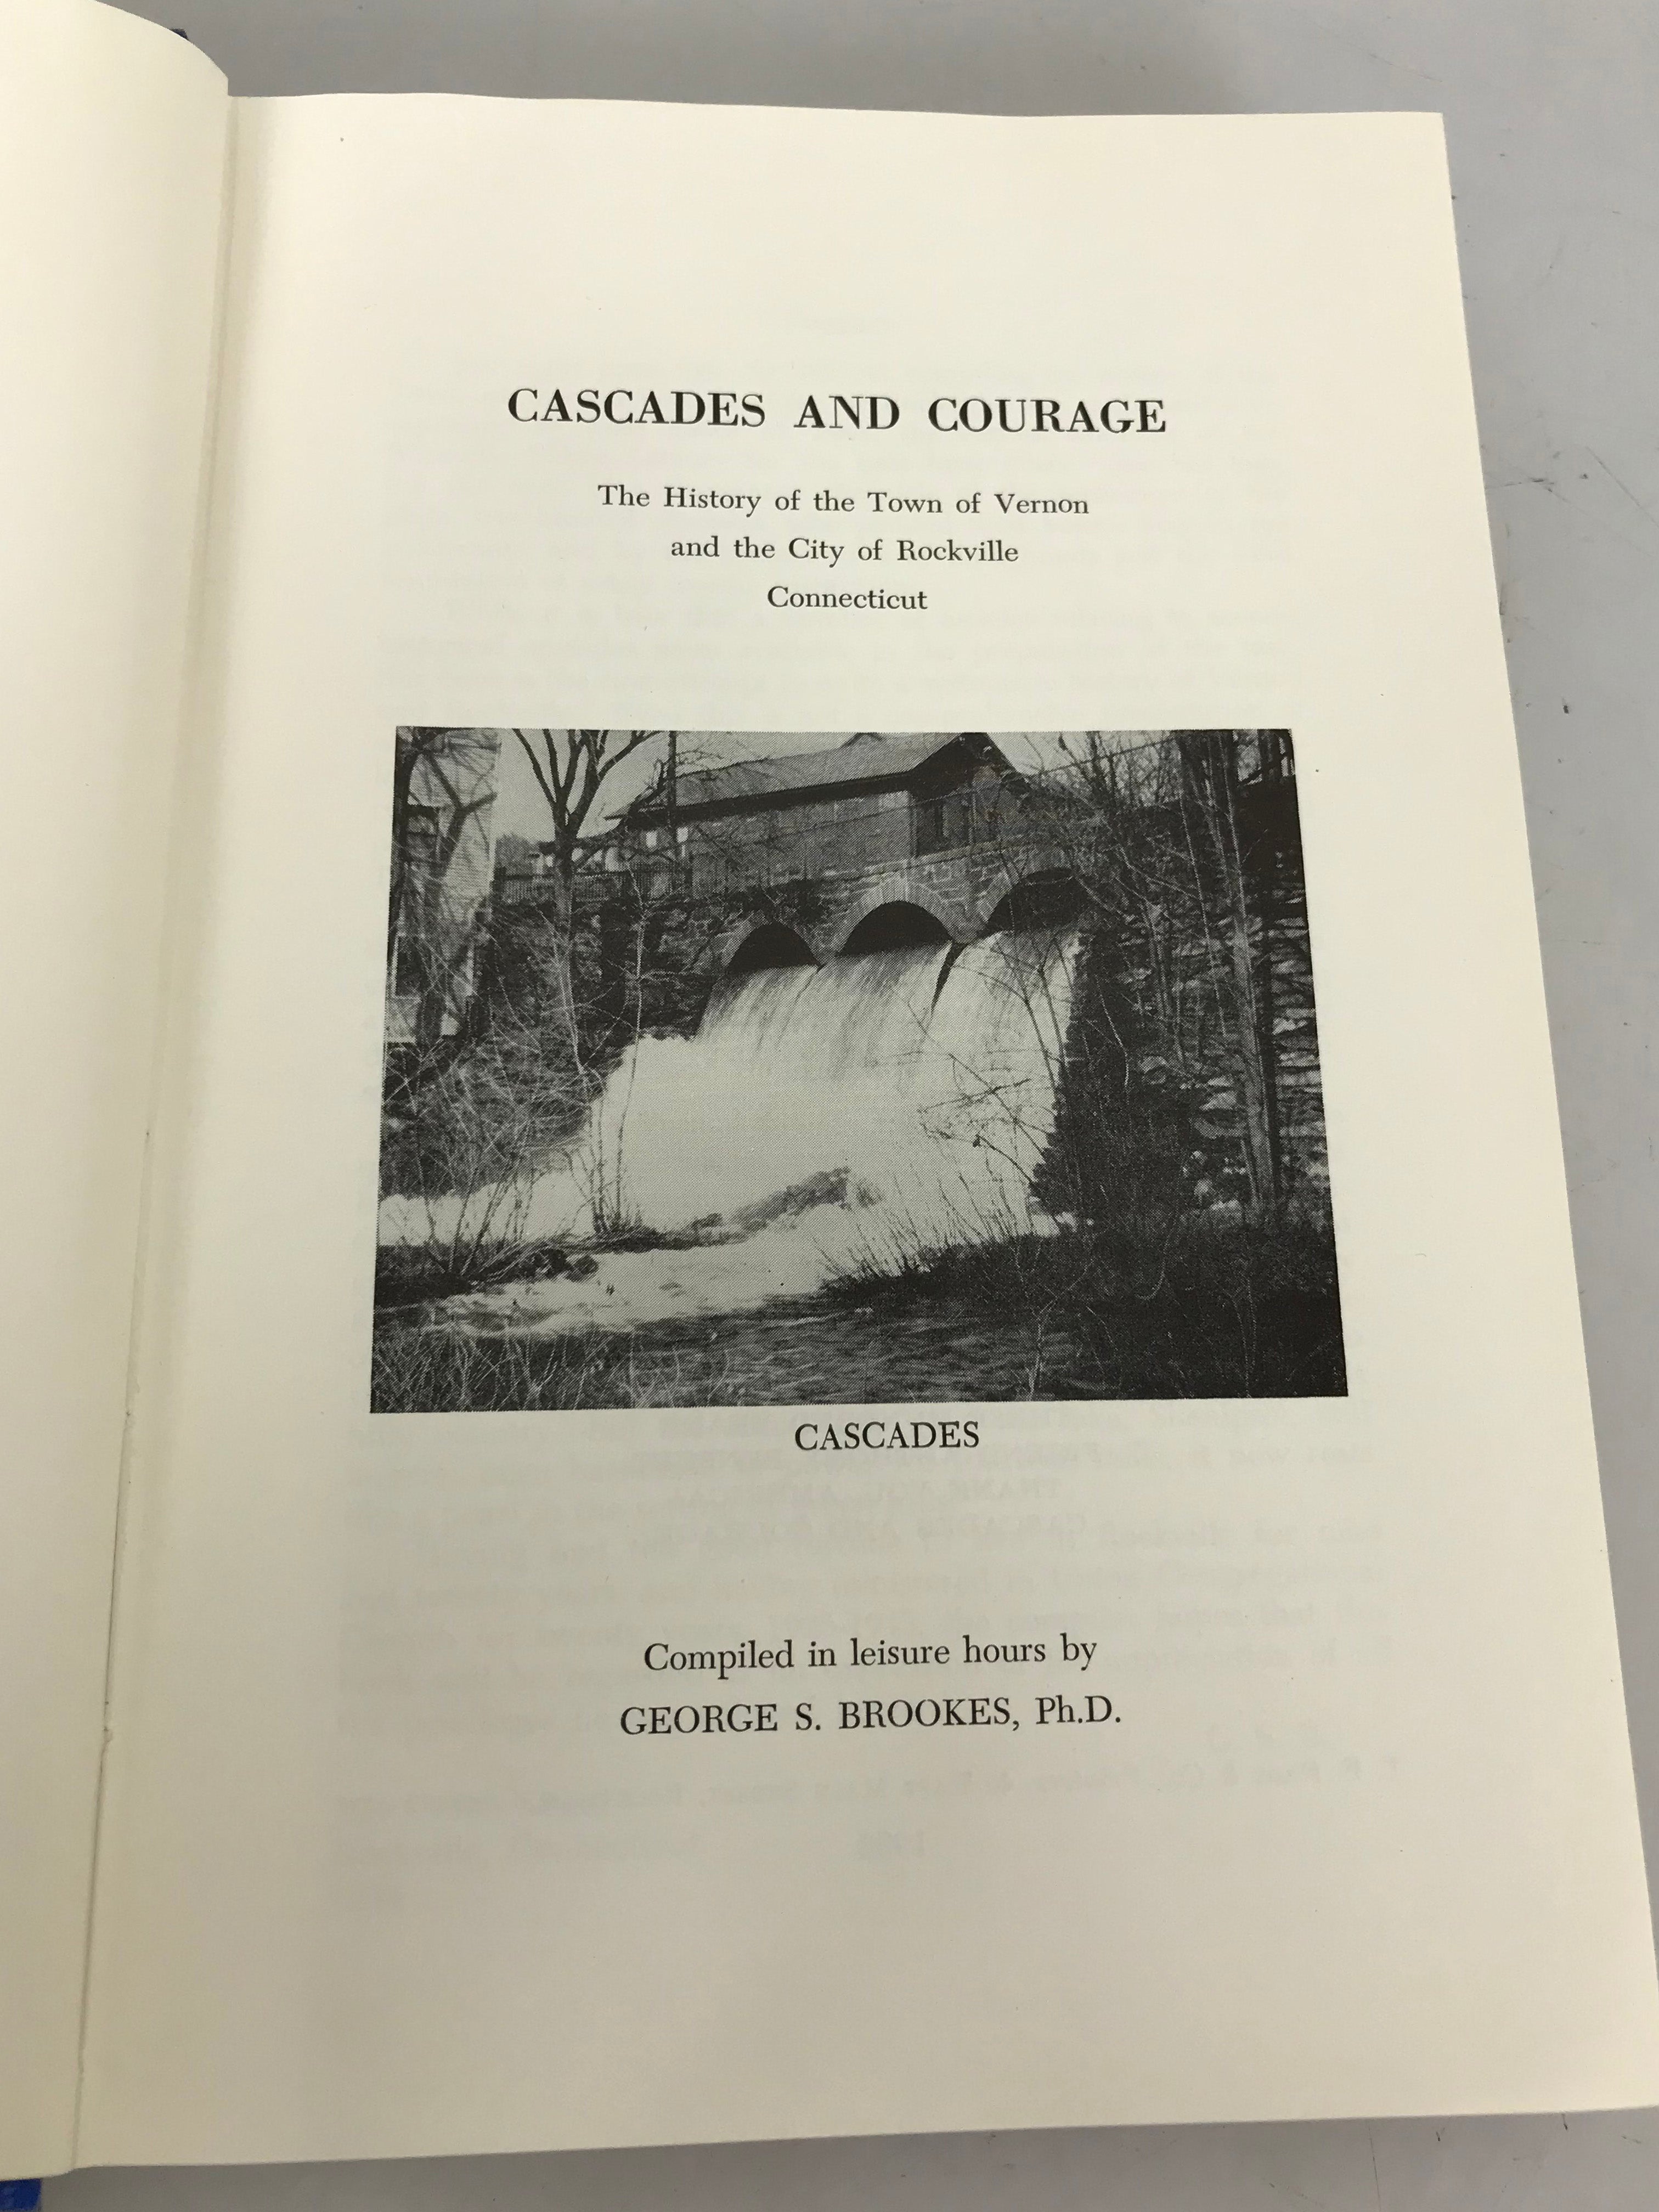 Cascades and Courage by George Brookes 1955